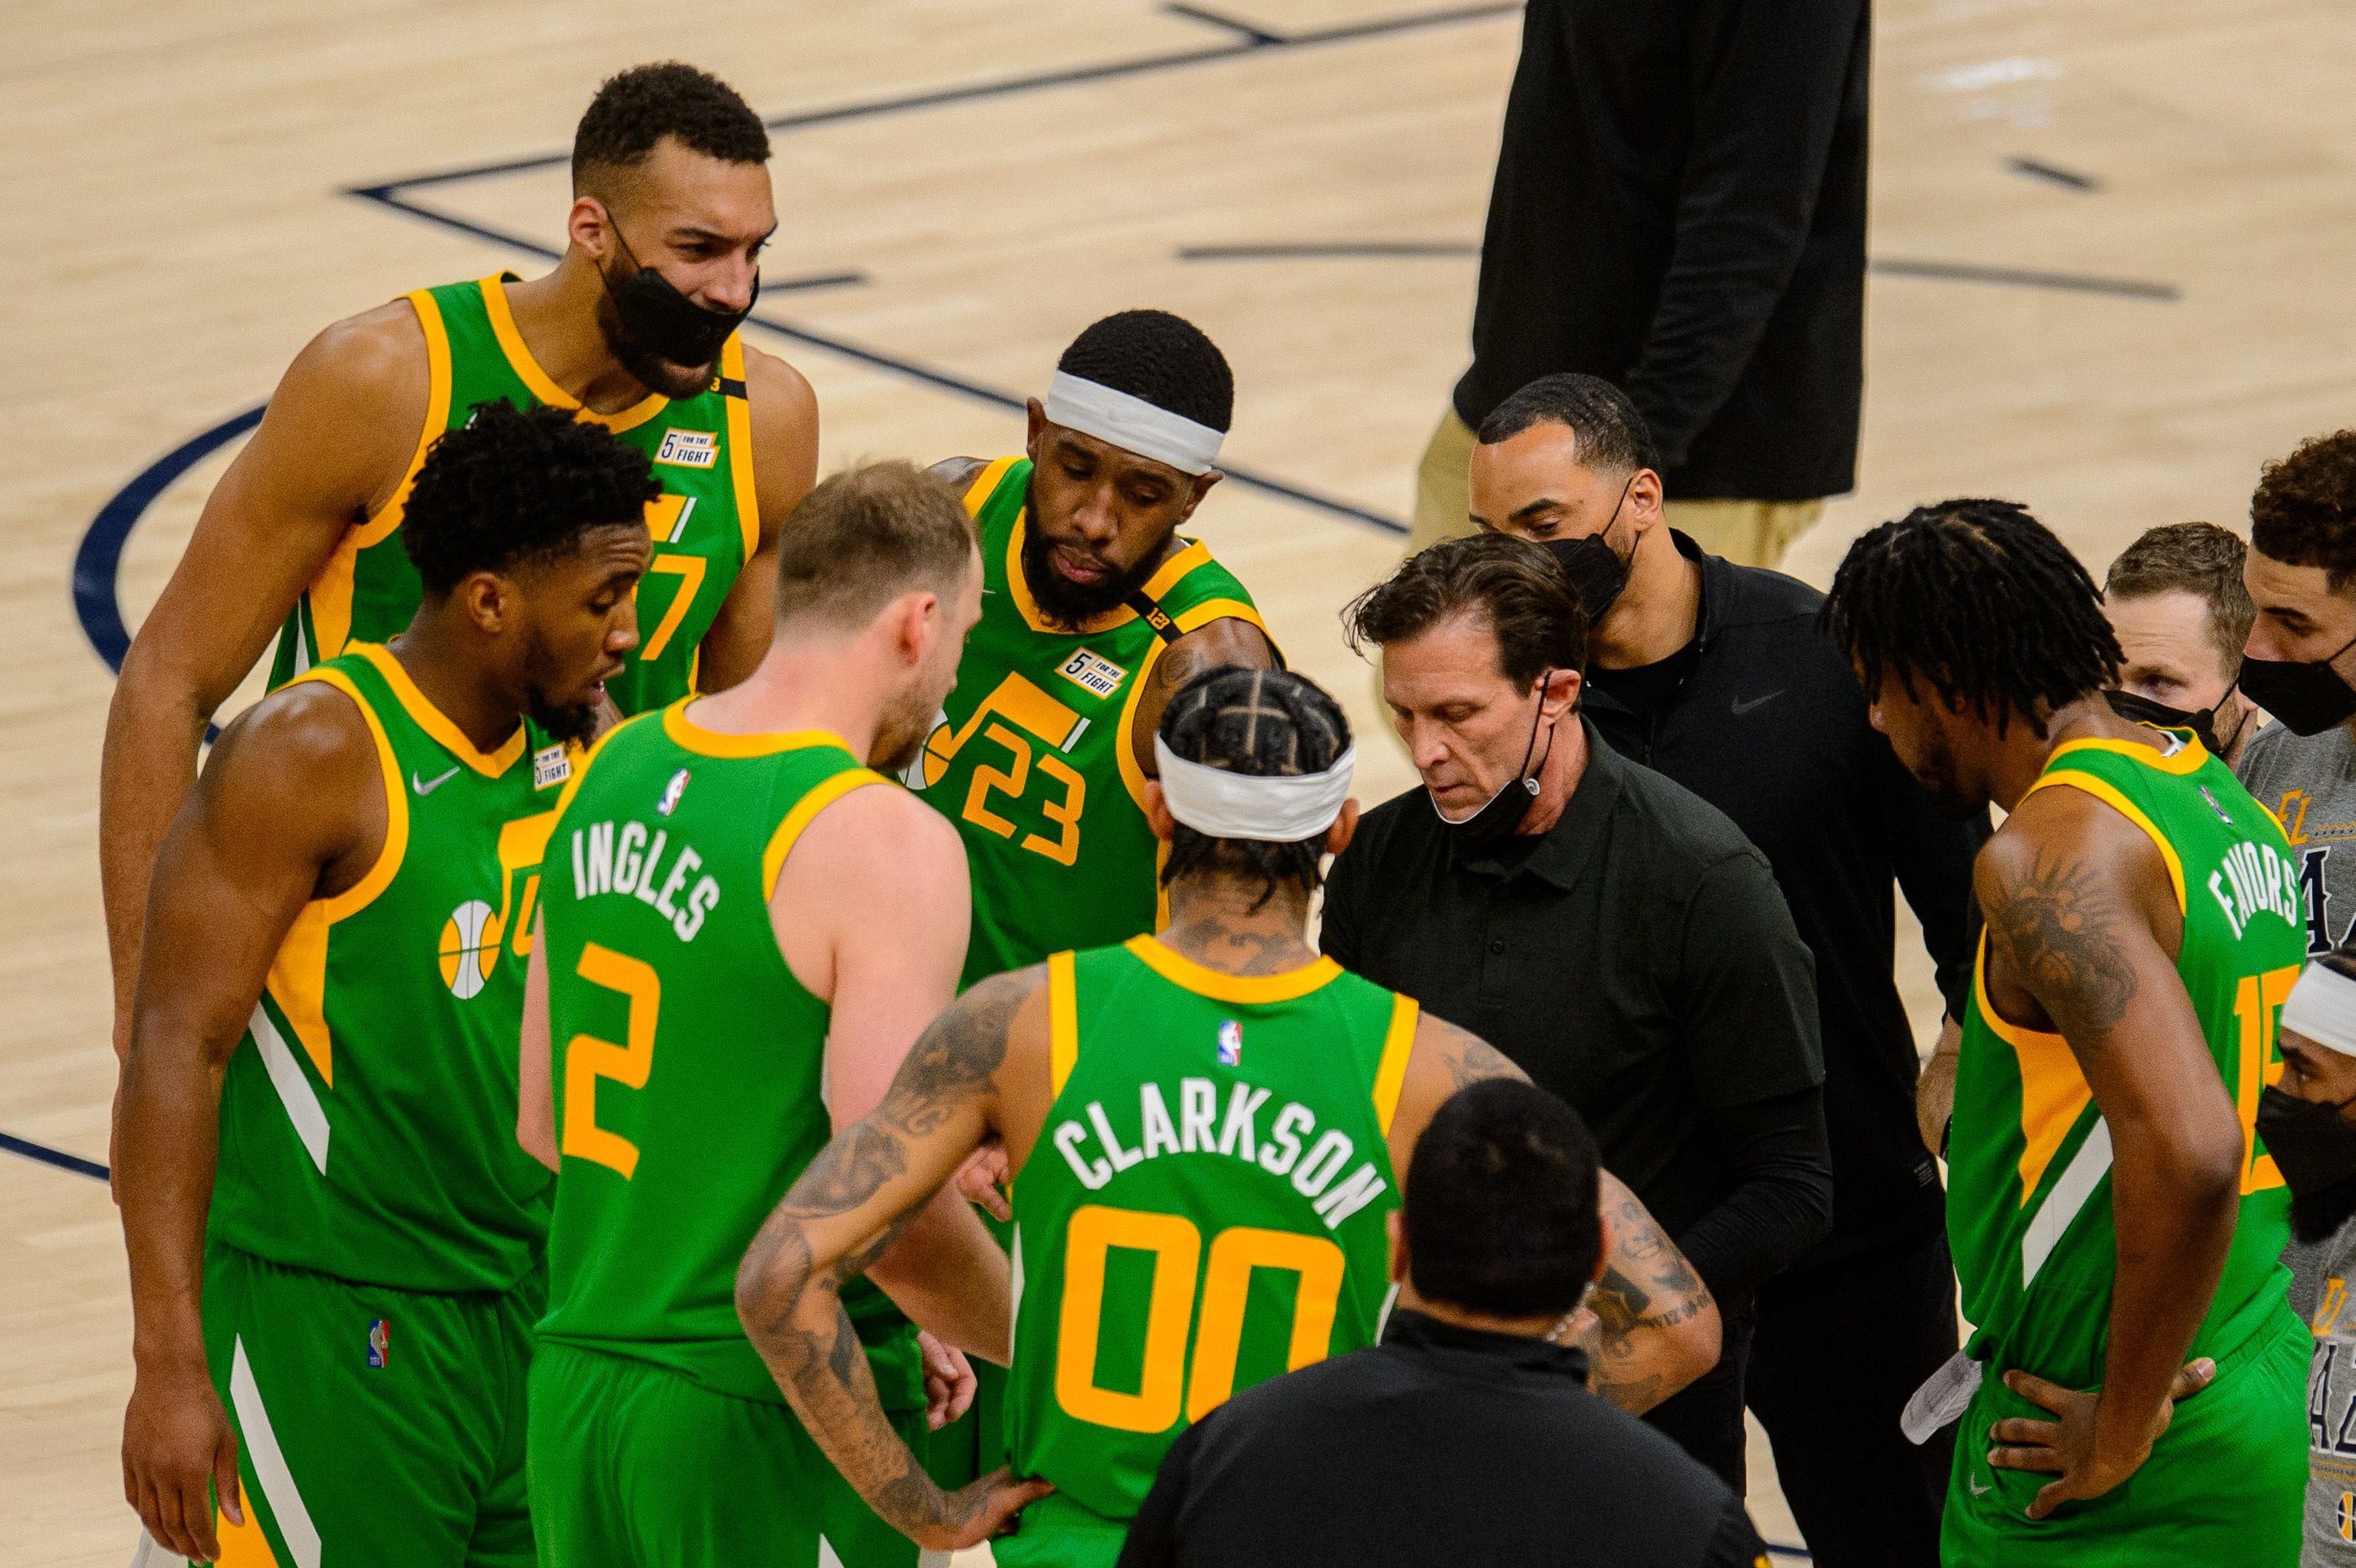 Gordon Monson: The Utah Jazz and their best-in-the-NBA will continue to  face skepticism until they get it done in the postseason